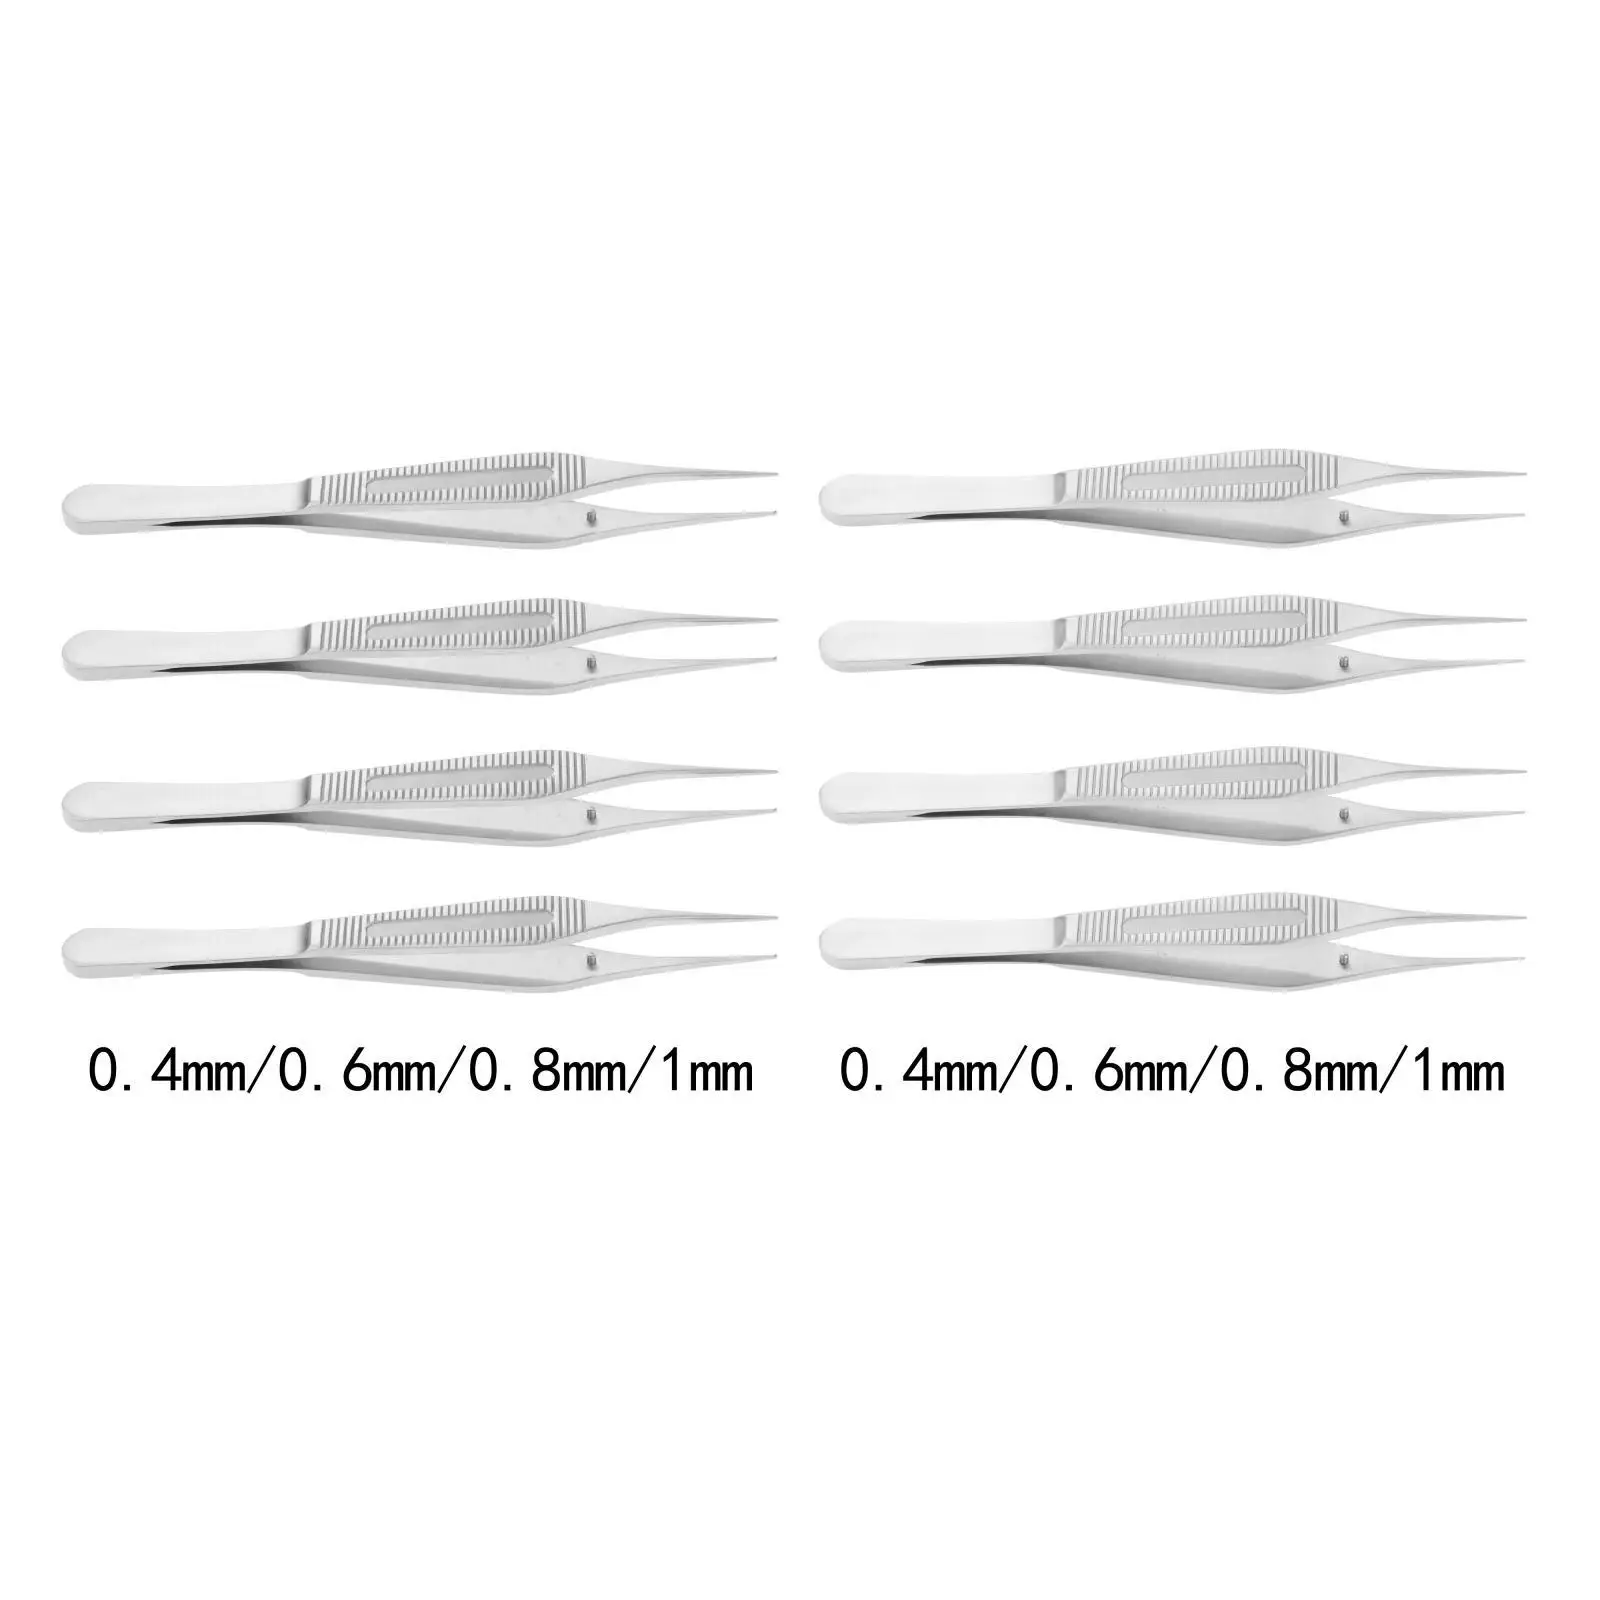 Long Tweezers Pointed Micro Forceps Repair Tool for Microscopes Hotel